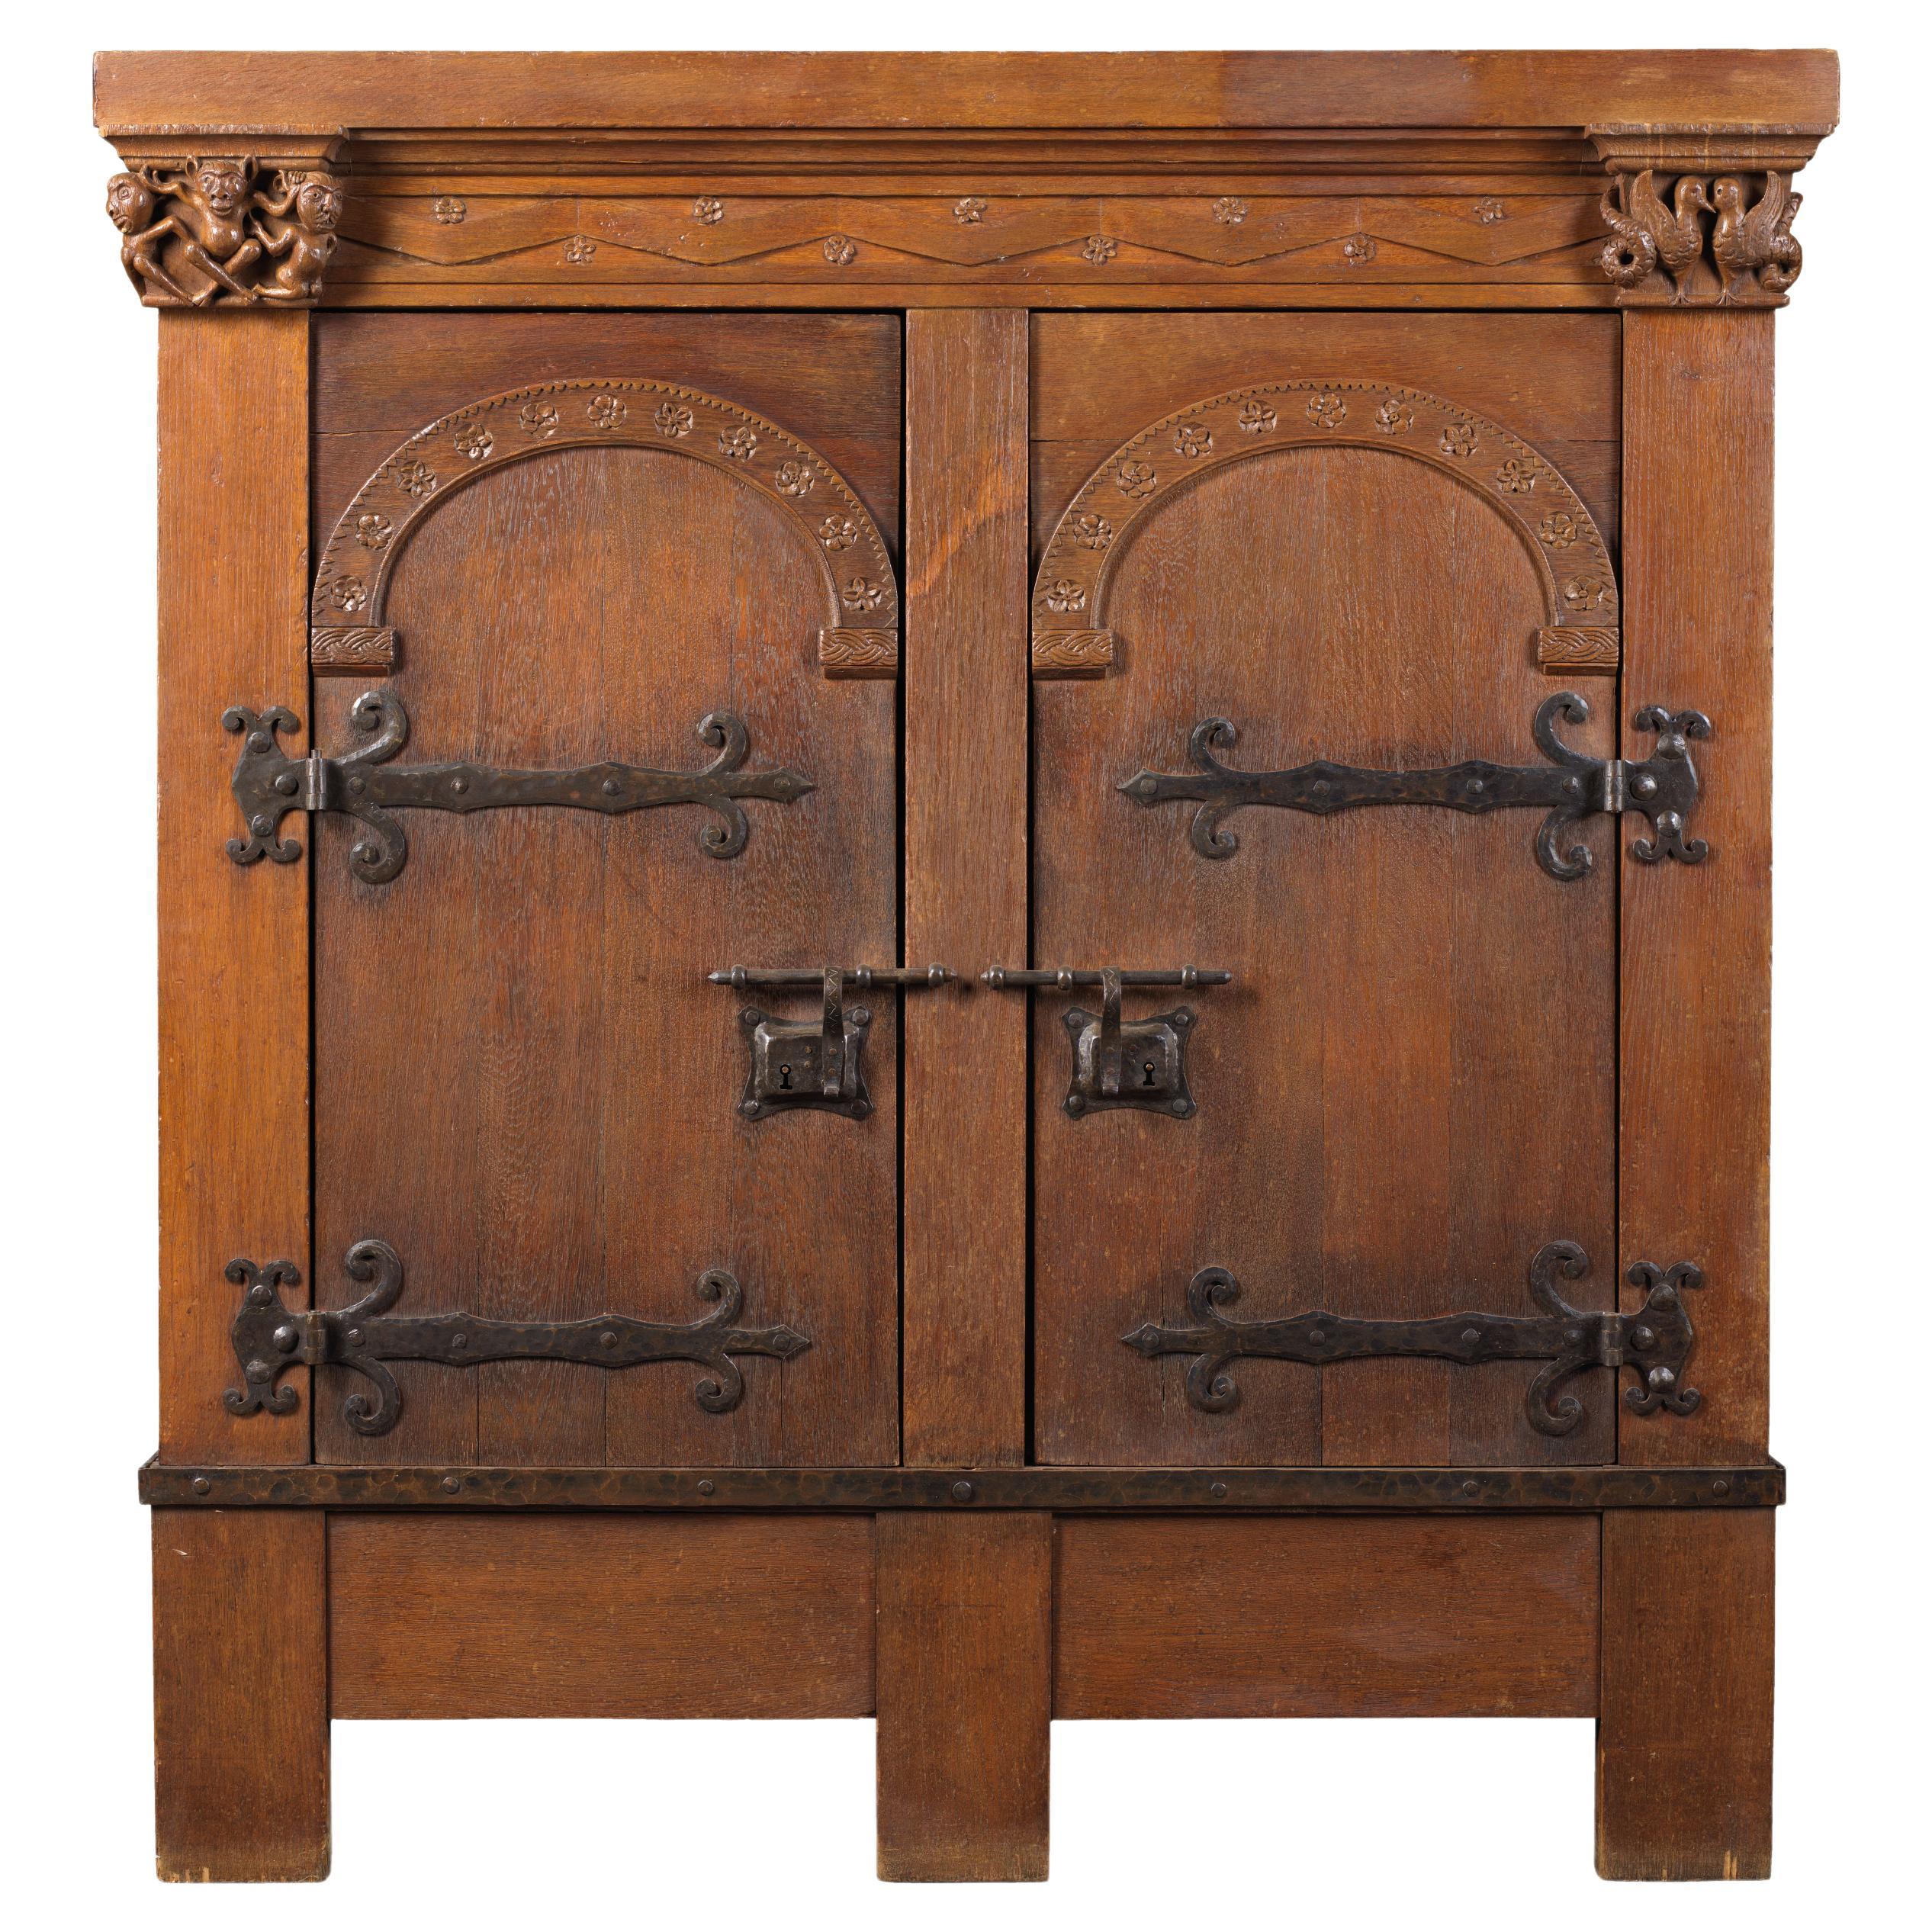 Gothic Revival Apothecary Cabinet